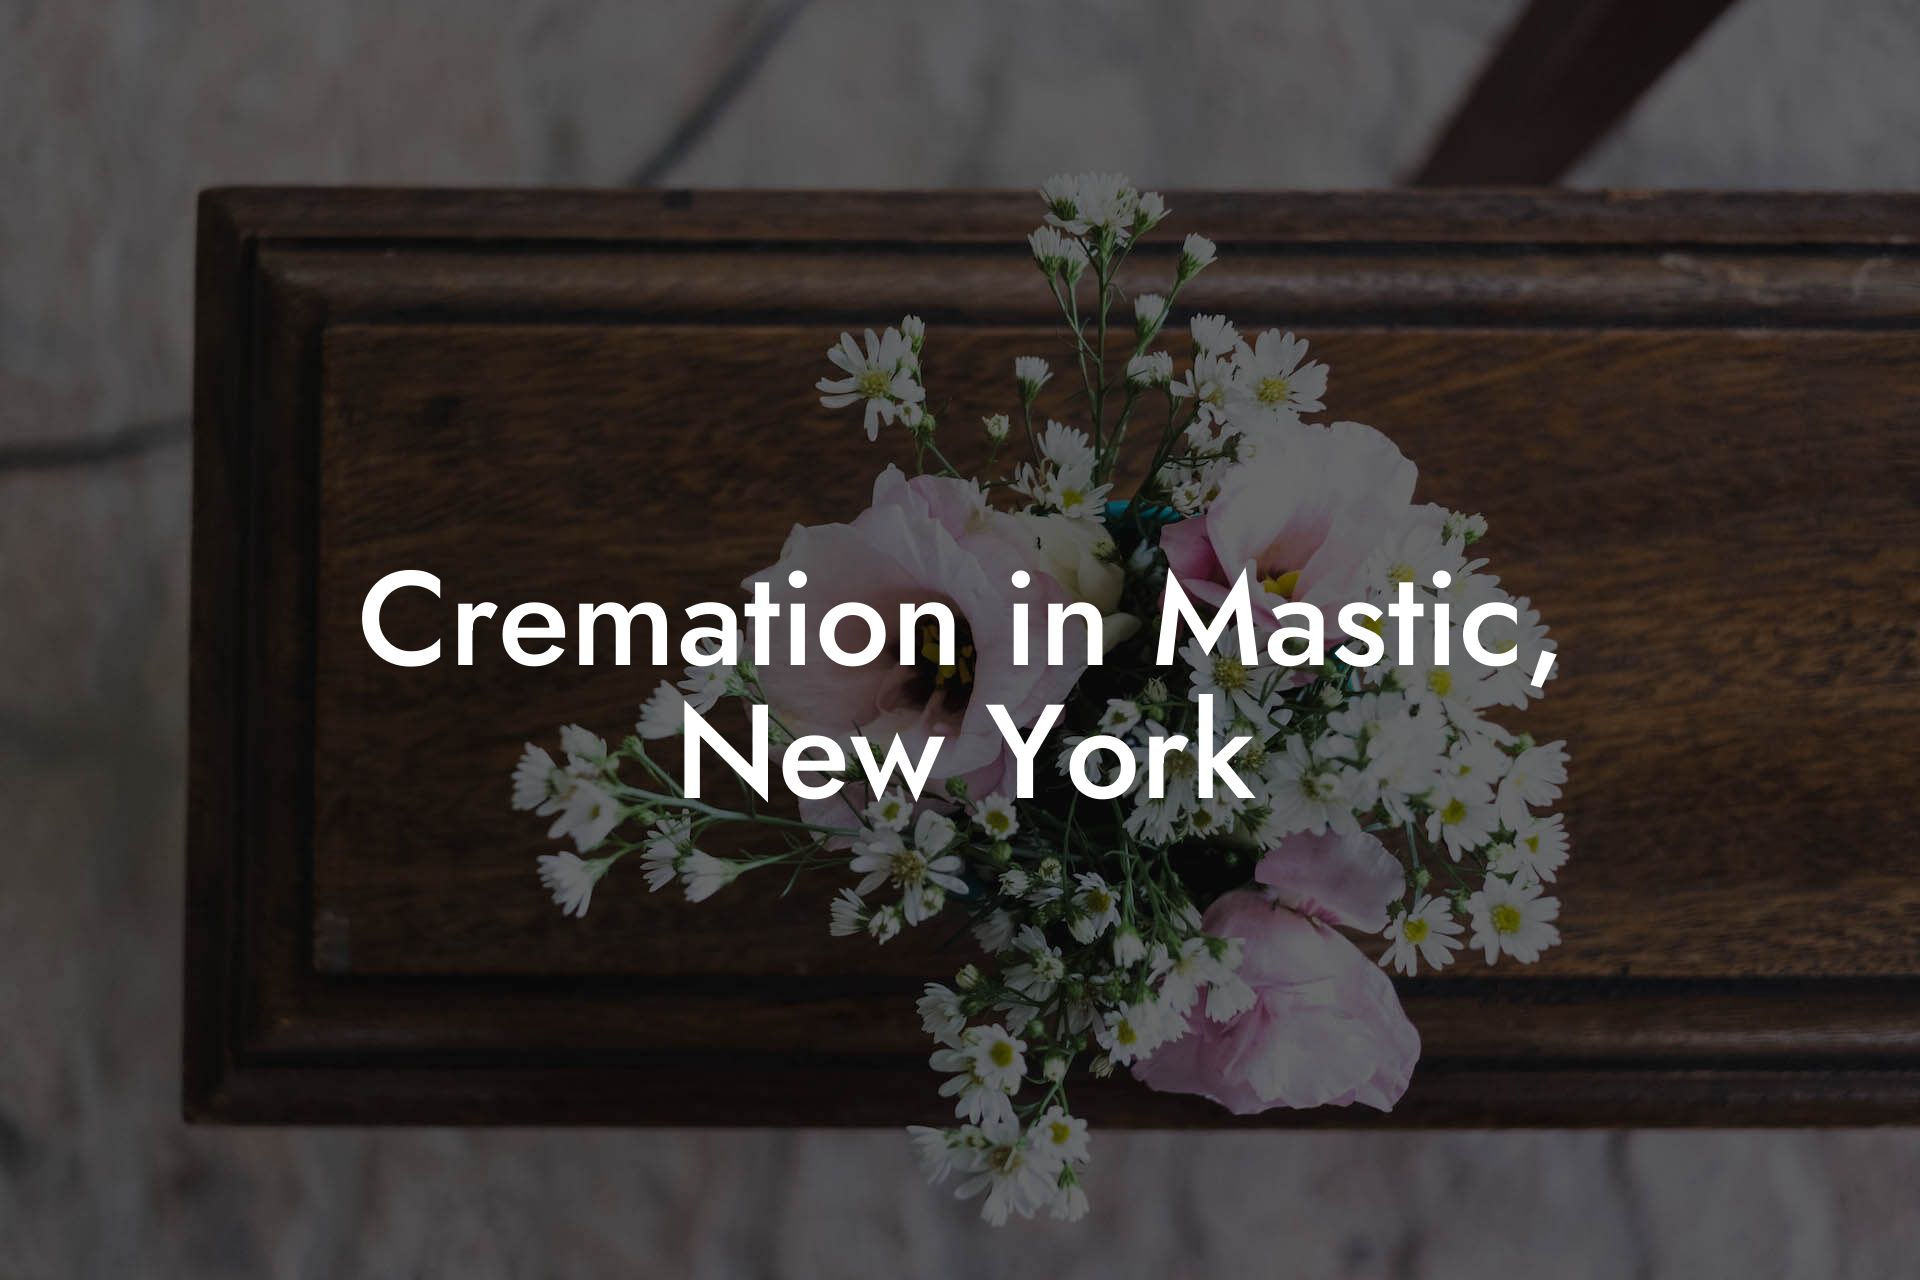 Cremation in Mastic, New York